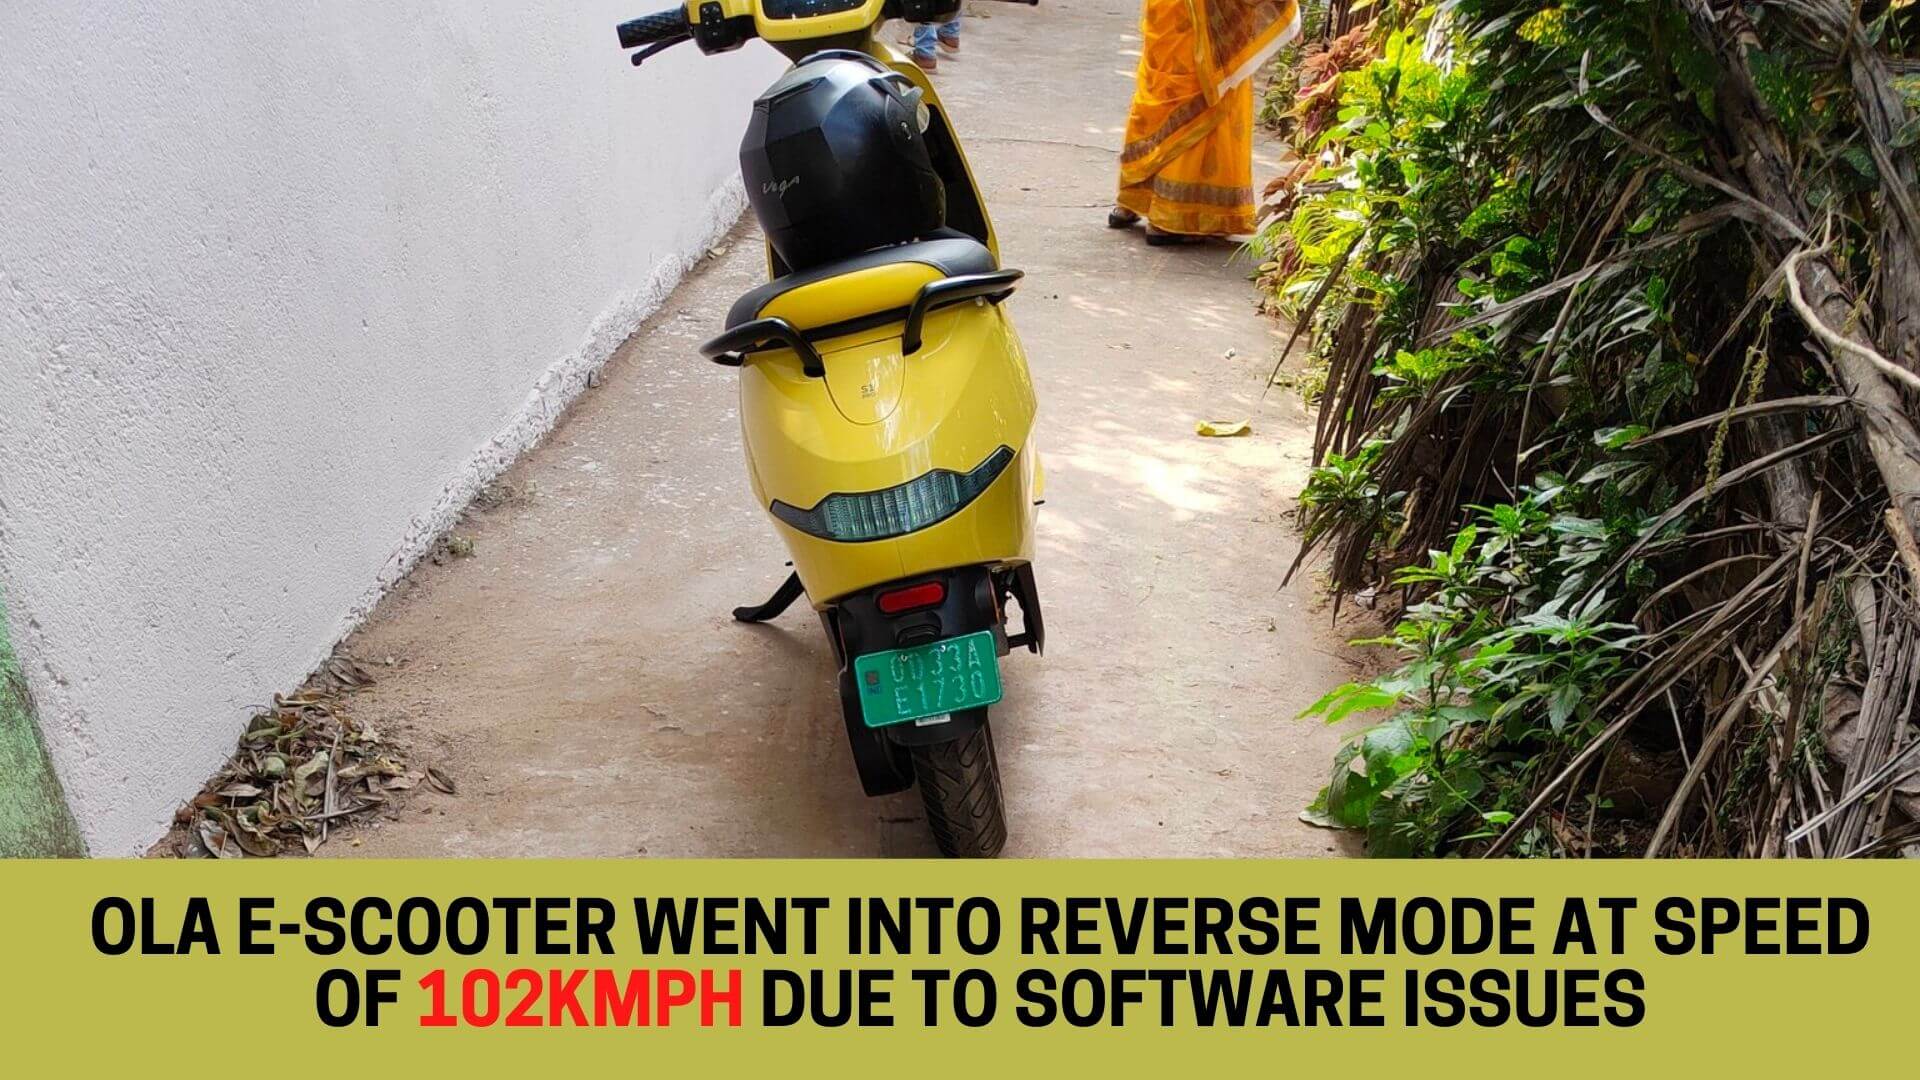 https://e-vehicleinfo.com/ola-e-scooter-went-into-reverse-mode-at-speed-of-102kmph/